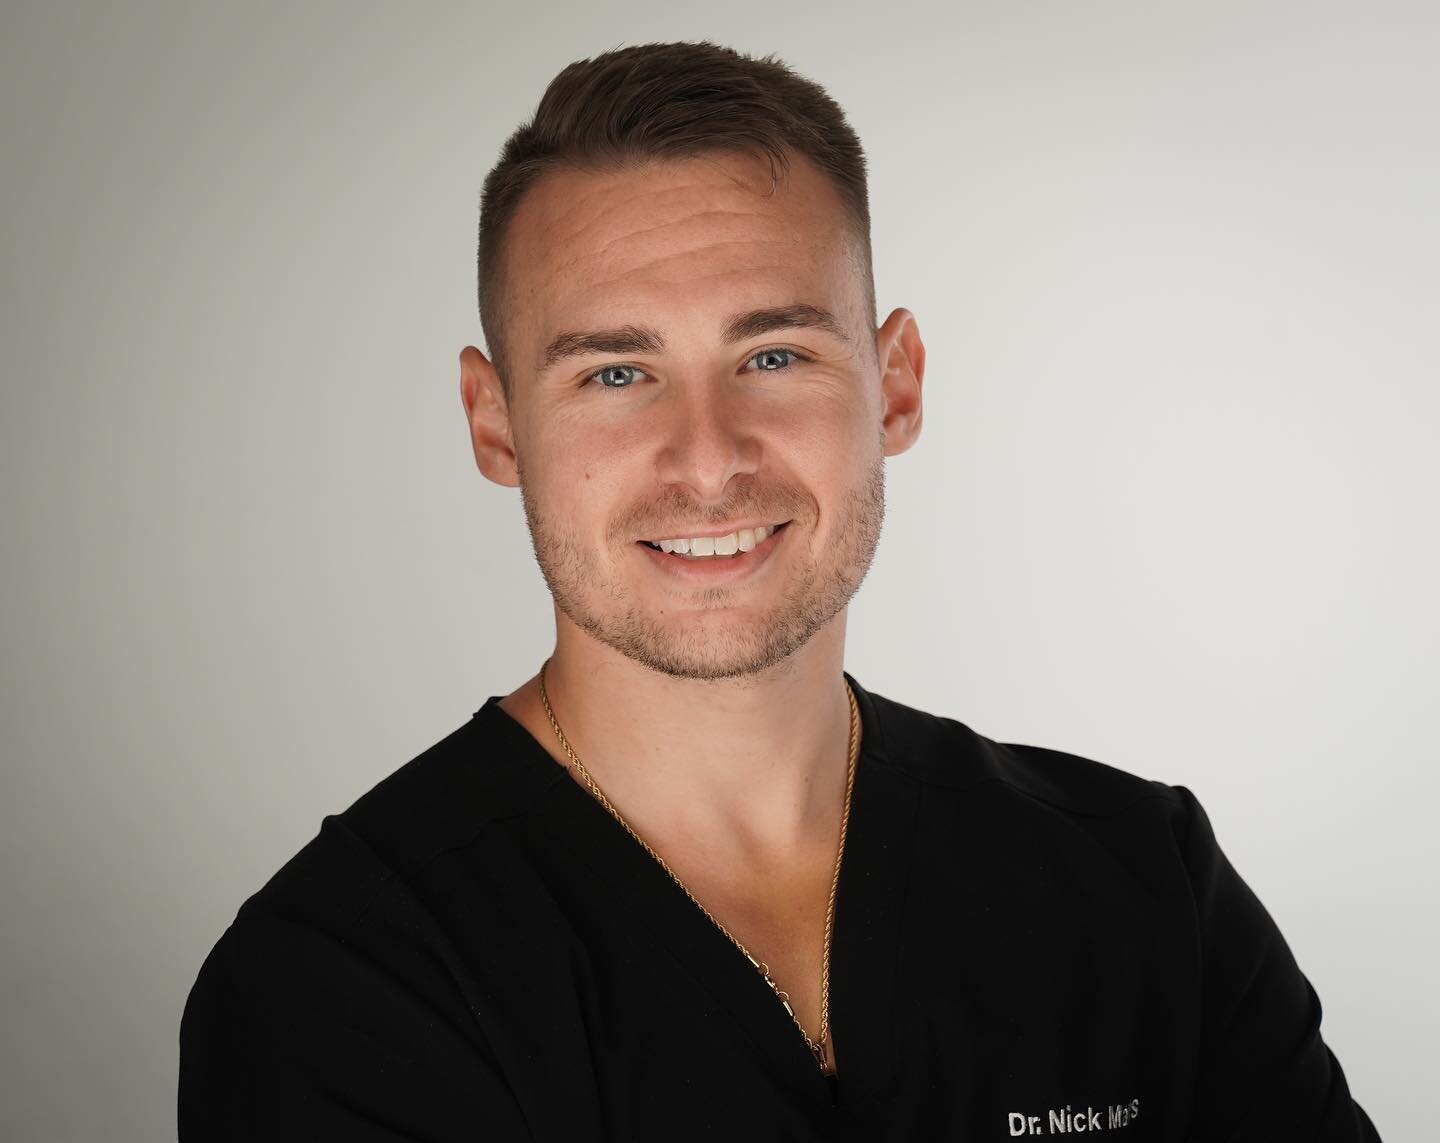 Dr. Nick Malles

Dr. Malles Attended Michigan State University, where he received his undergraduate degree in Nutritional Science in 2016. He then went on to complete his Master&rsquo;s in Exercise and Nutritional Sciences at the University of Tampa,